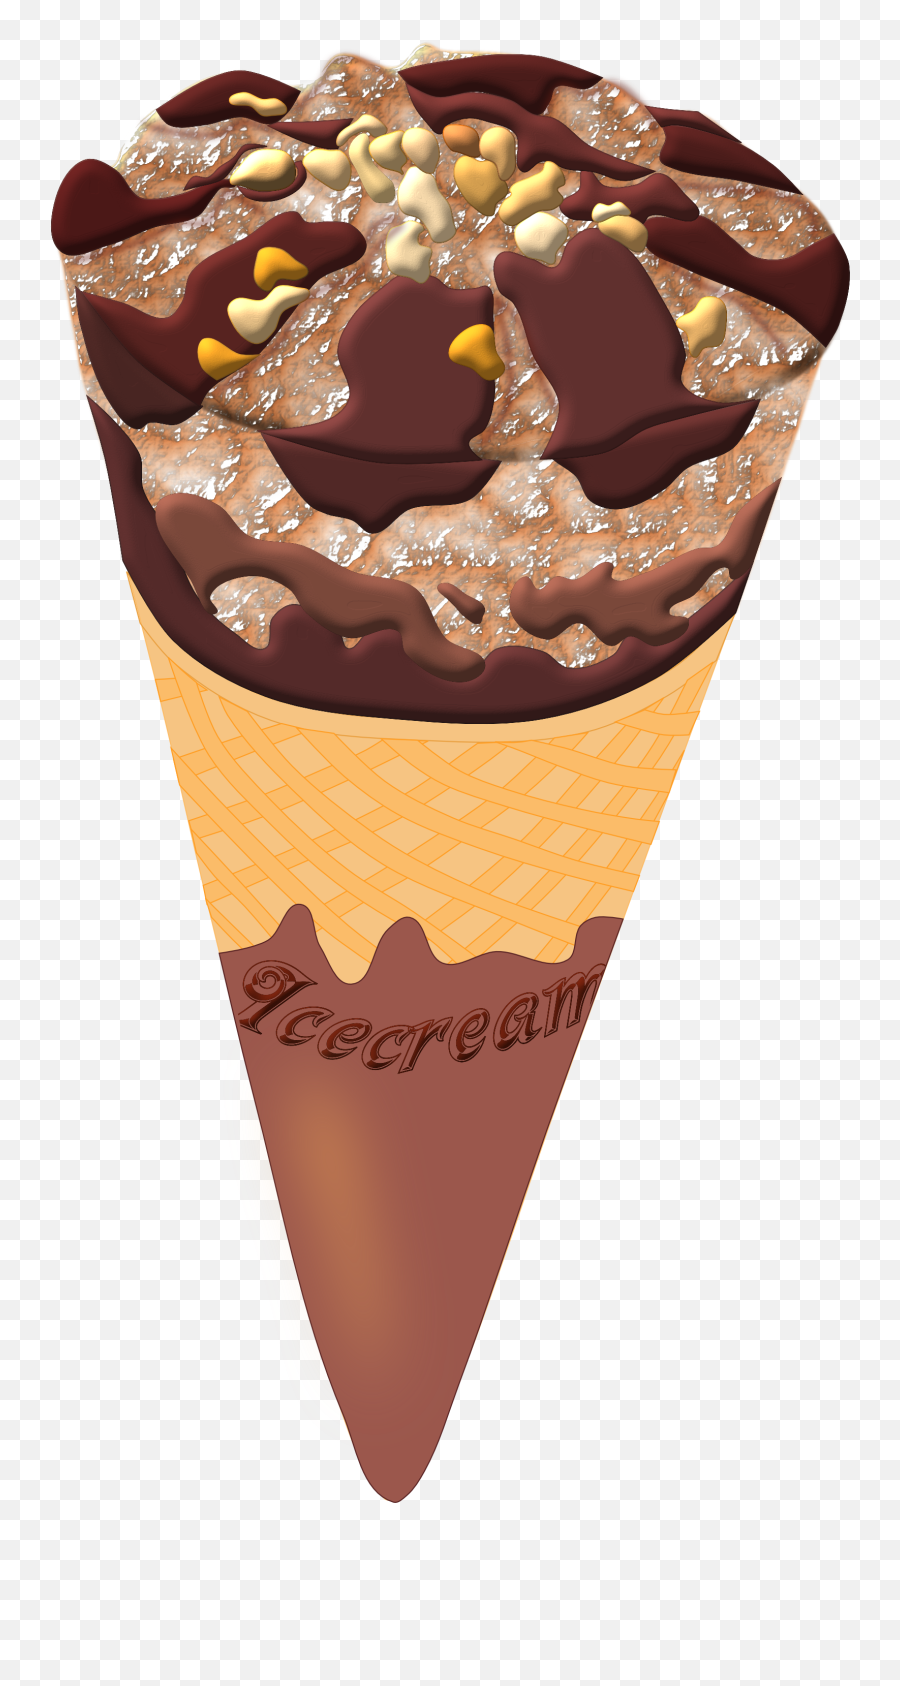 Pin By Saeed On Pig Png Ice Cream Images Ice Cream Ice Emoji,Ice Cream Cone Transparent Background